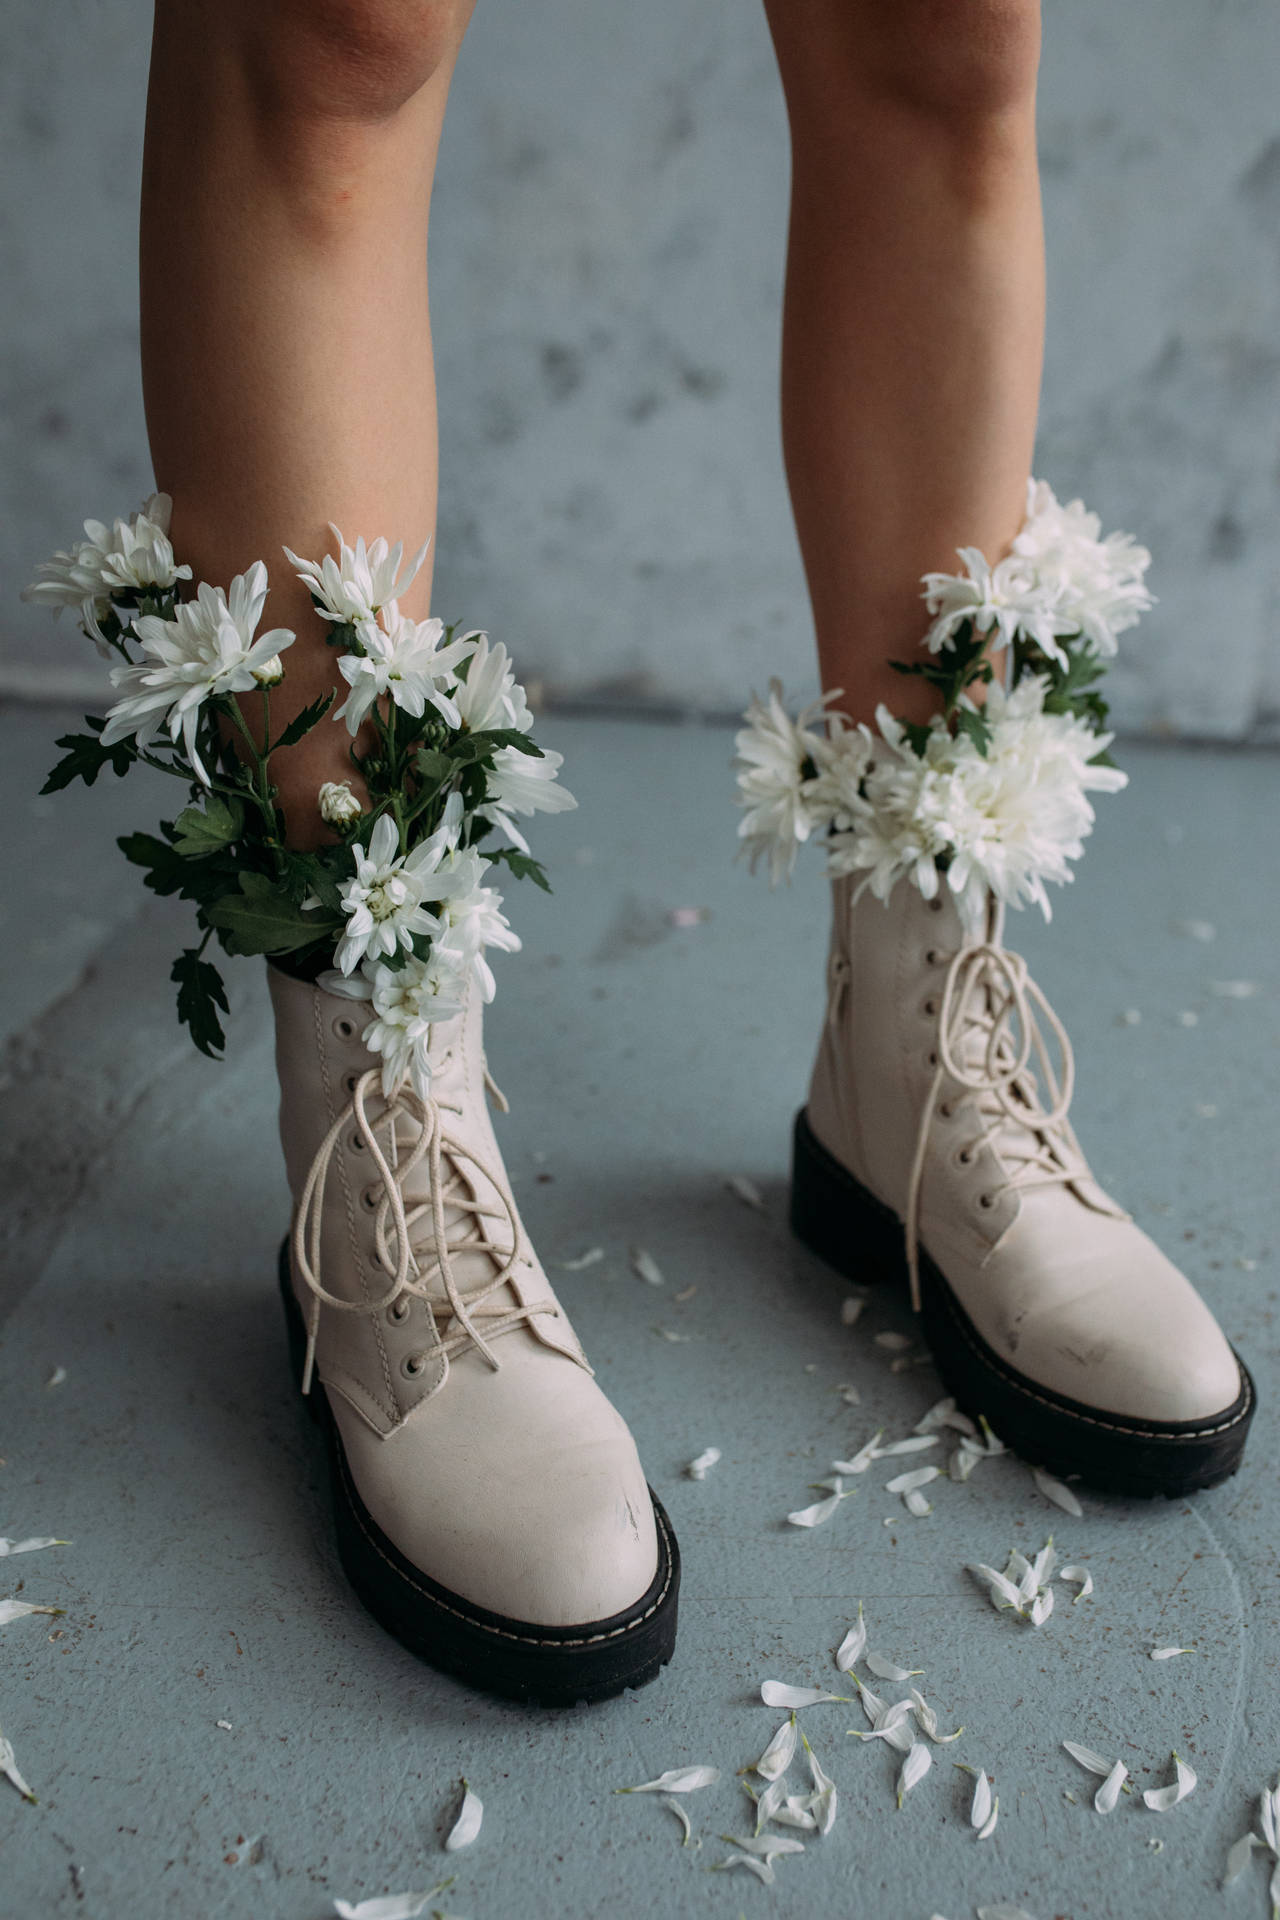 White Flowers On Boots Background